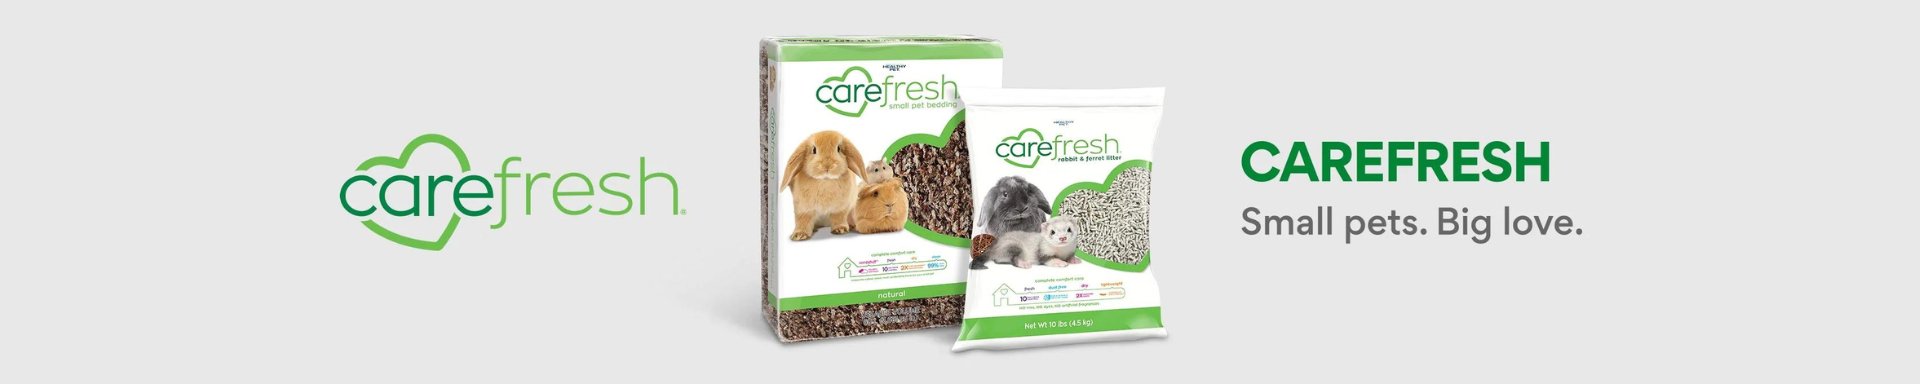 Carefresh Bedding Small Pets I The Pets Club 